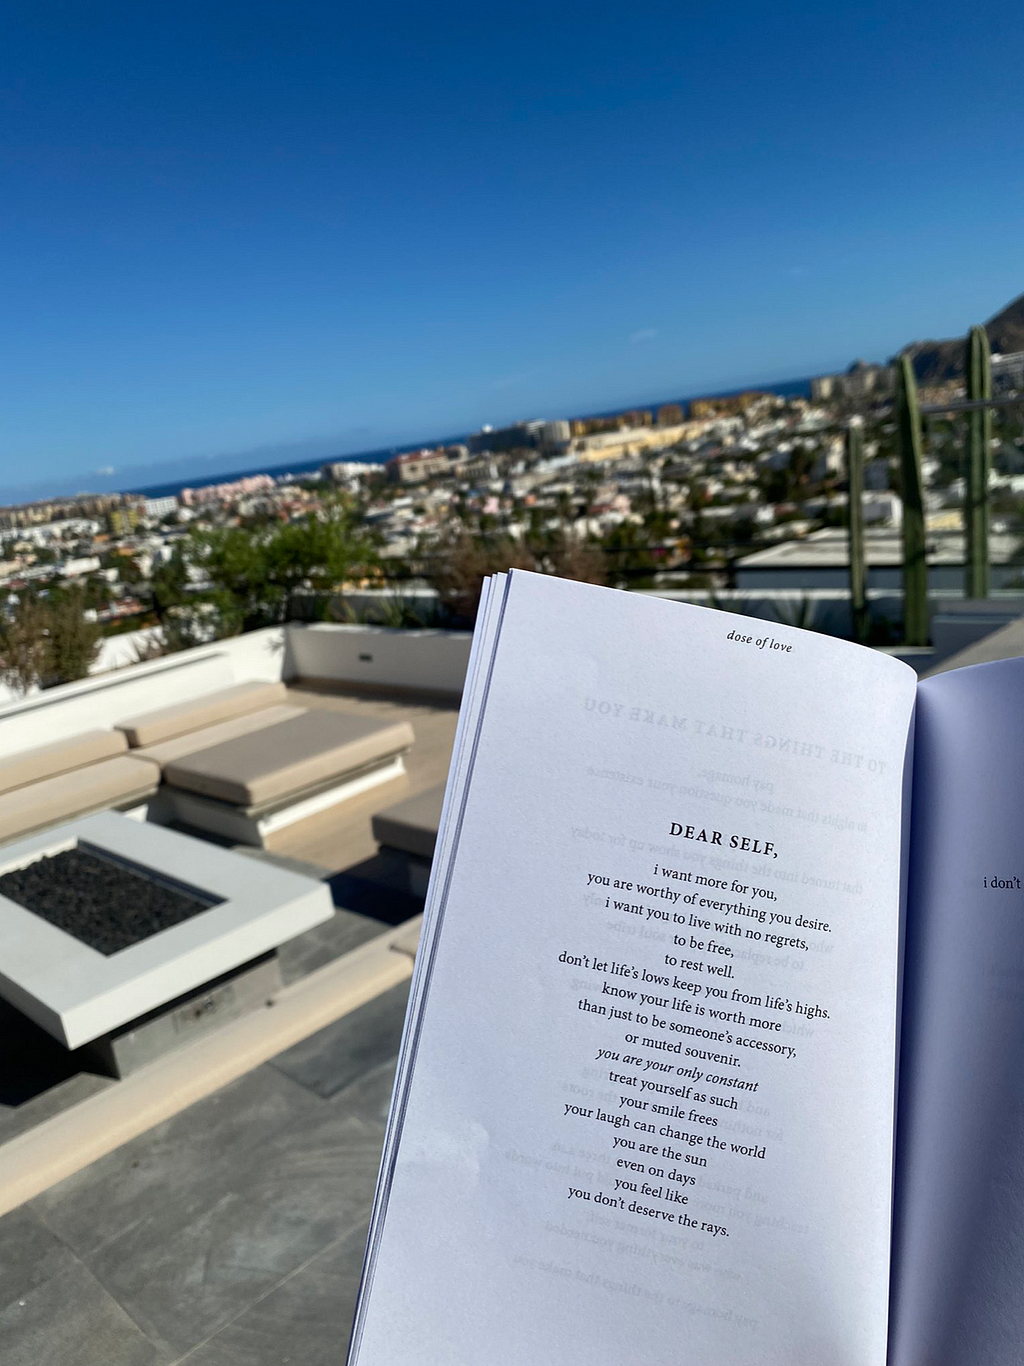 A book of poetry is opened up on a sunny rooftop patio. In the backround, a sunny, suburban cityscape with blue sky and an ocean view.